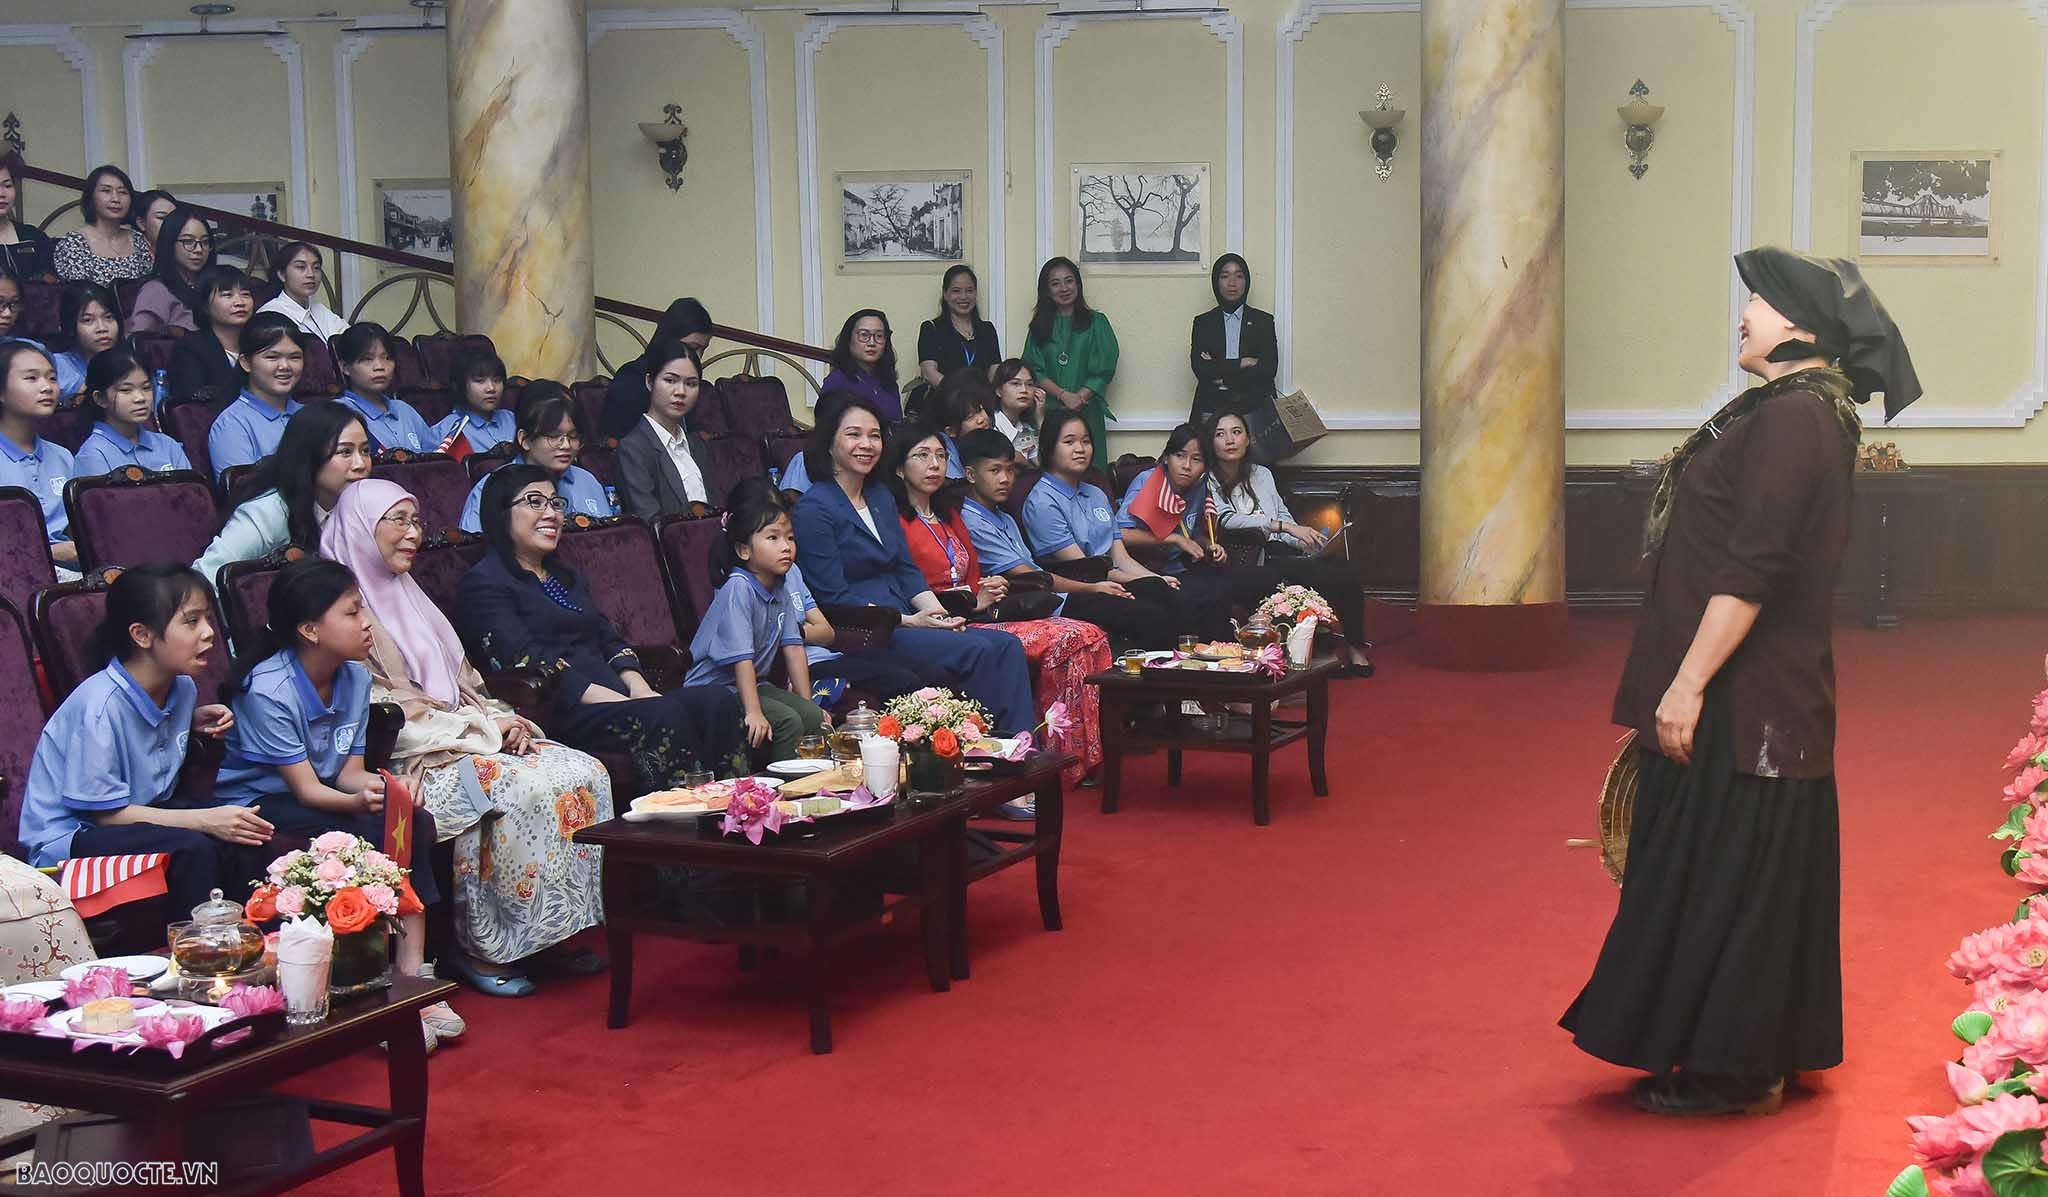 Spouses of Vietnamese, Malaysian PMs enjoy water puppetry in Hanoi